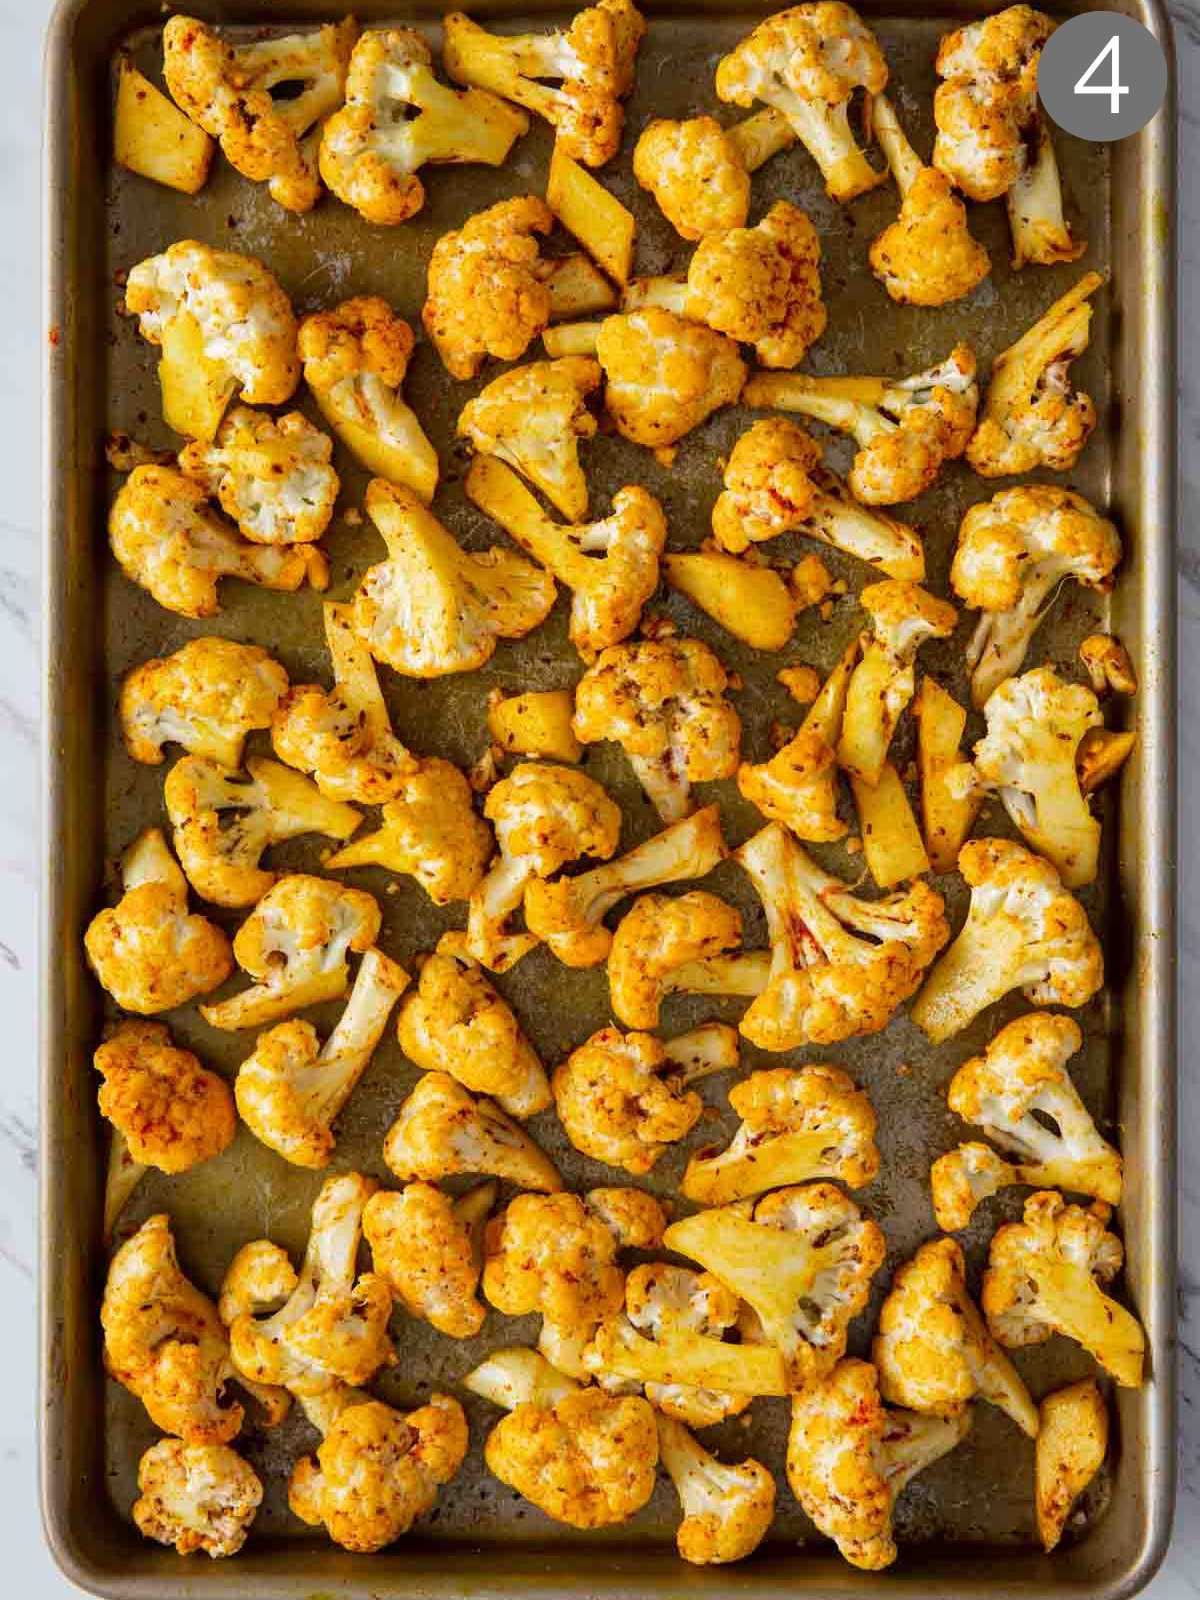 Cauliflower florets rubbed with seasonings and spread on a baking tray. 